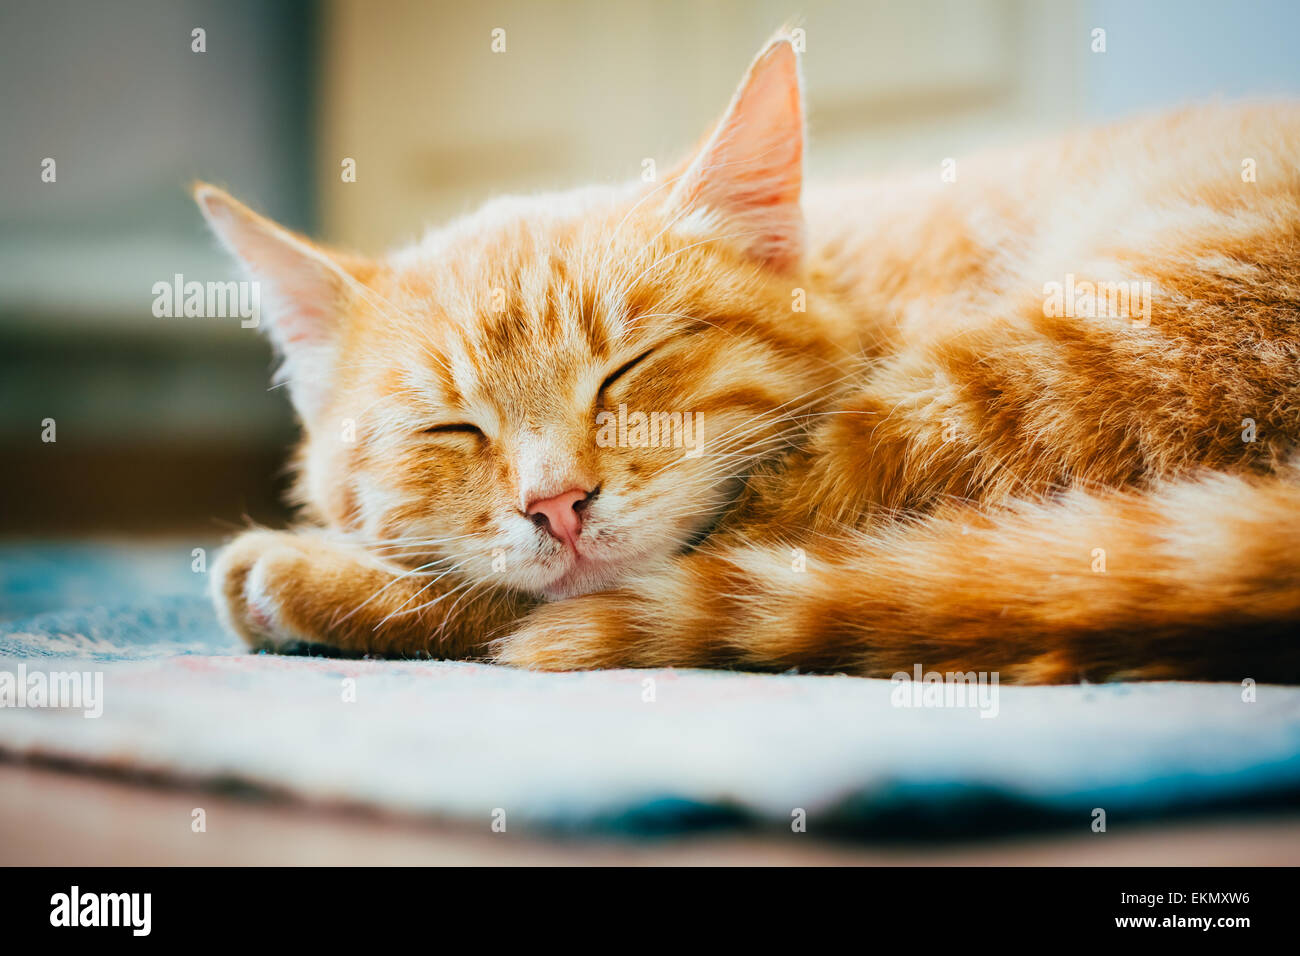 Tabby Cat Curled Up Sleeping High Resolution Stock Photography and ...